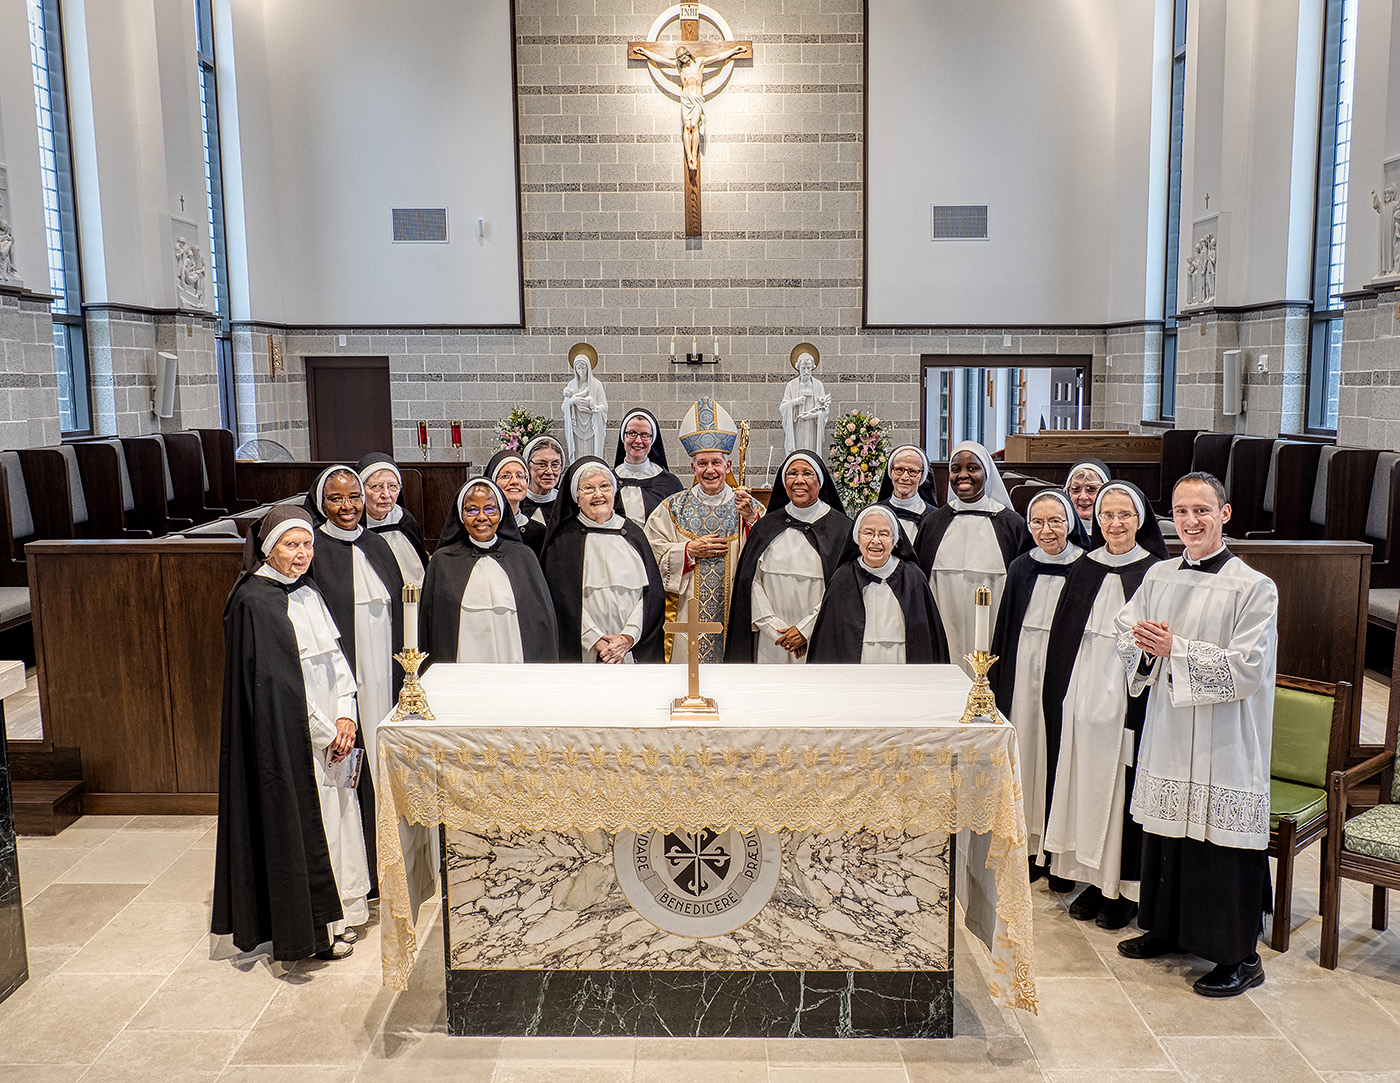 Dedication of the Dominican Monastery of Mary the Queen Girard, Illinois Aug 15 2022